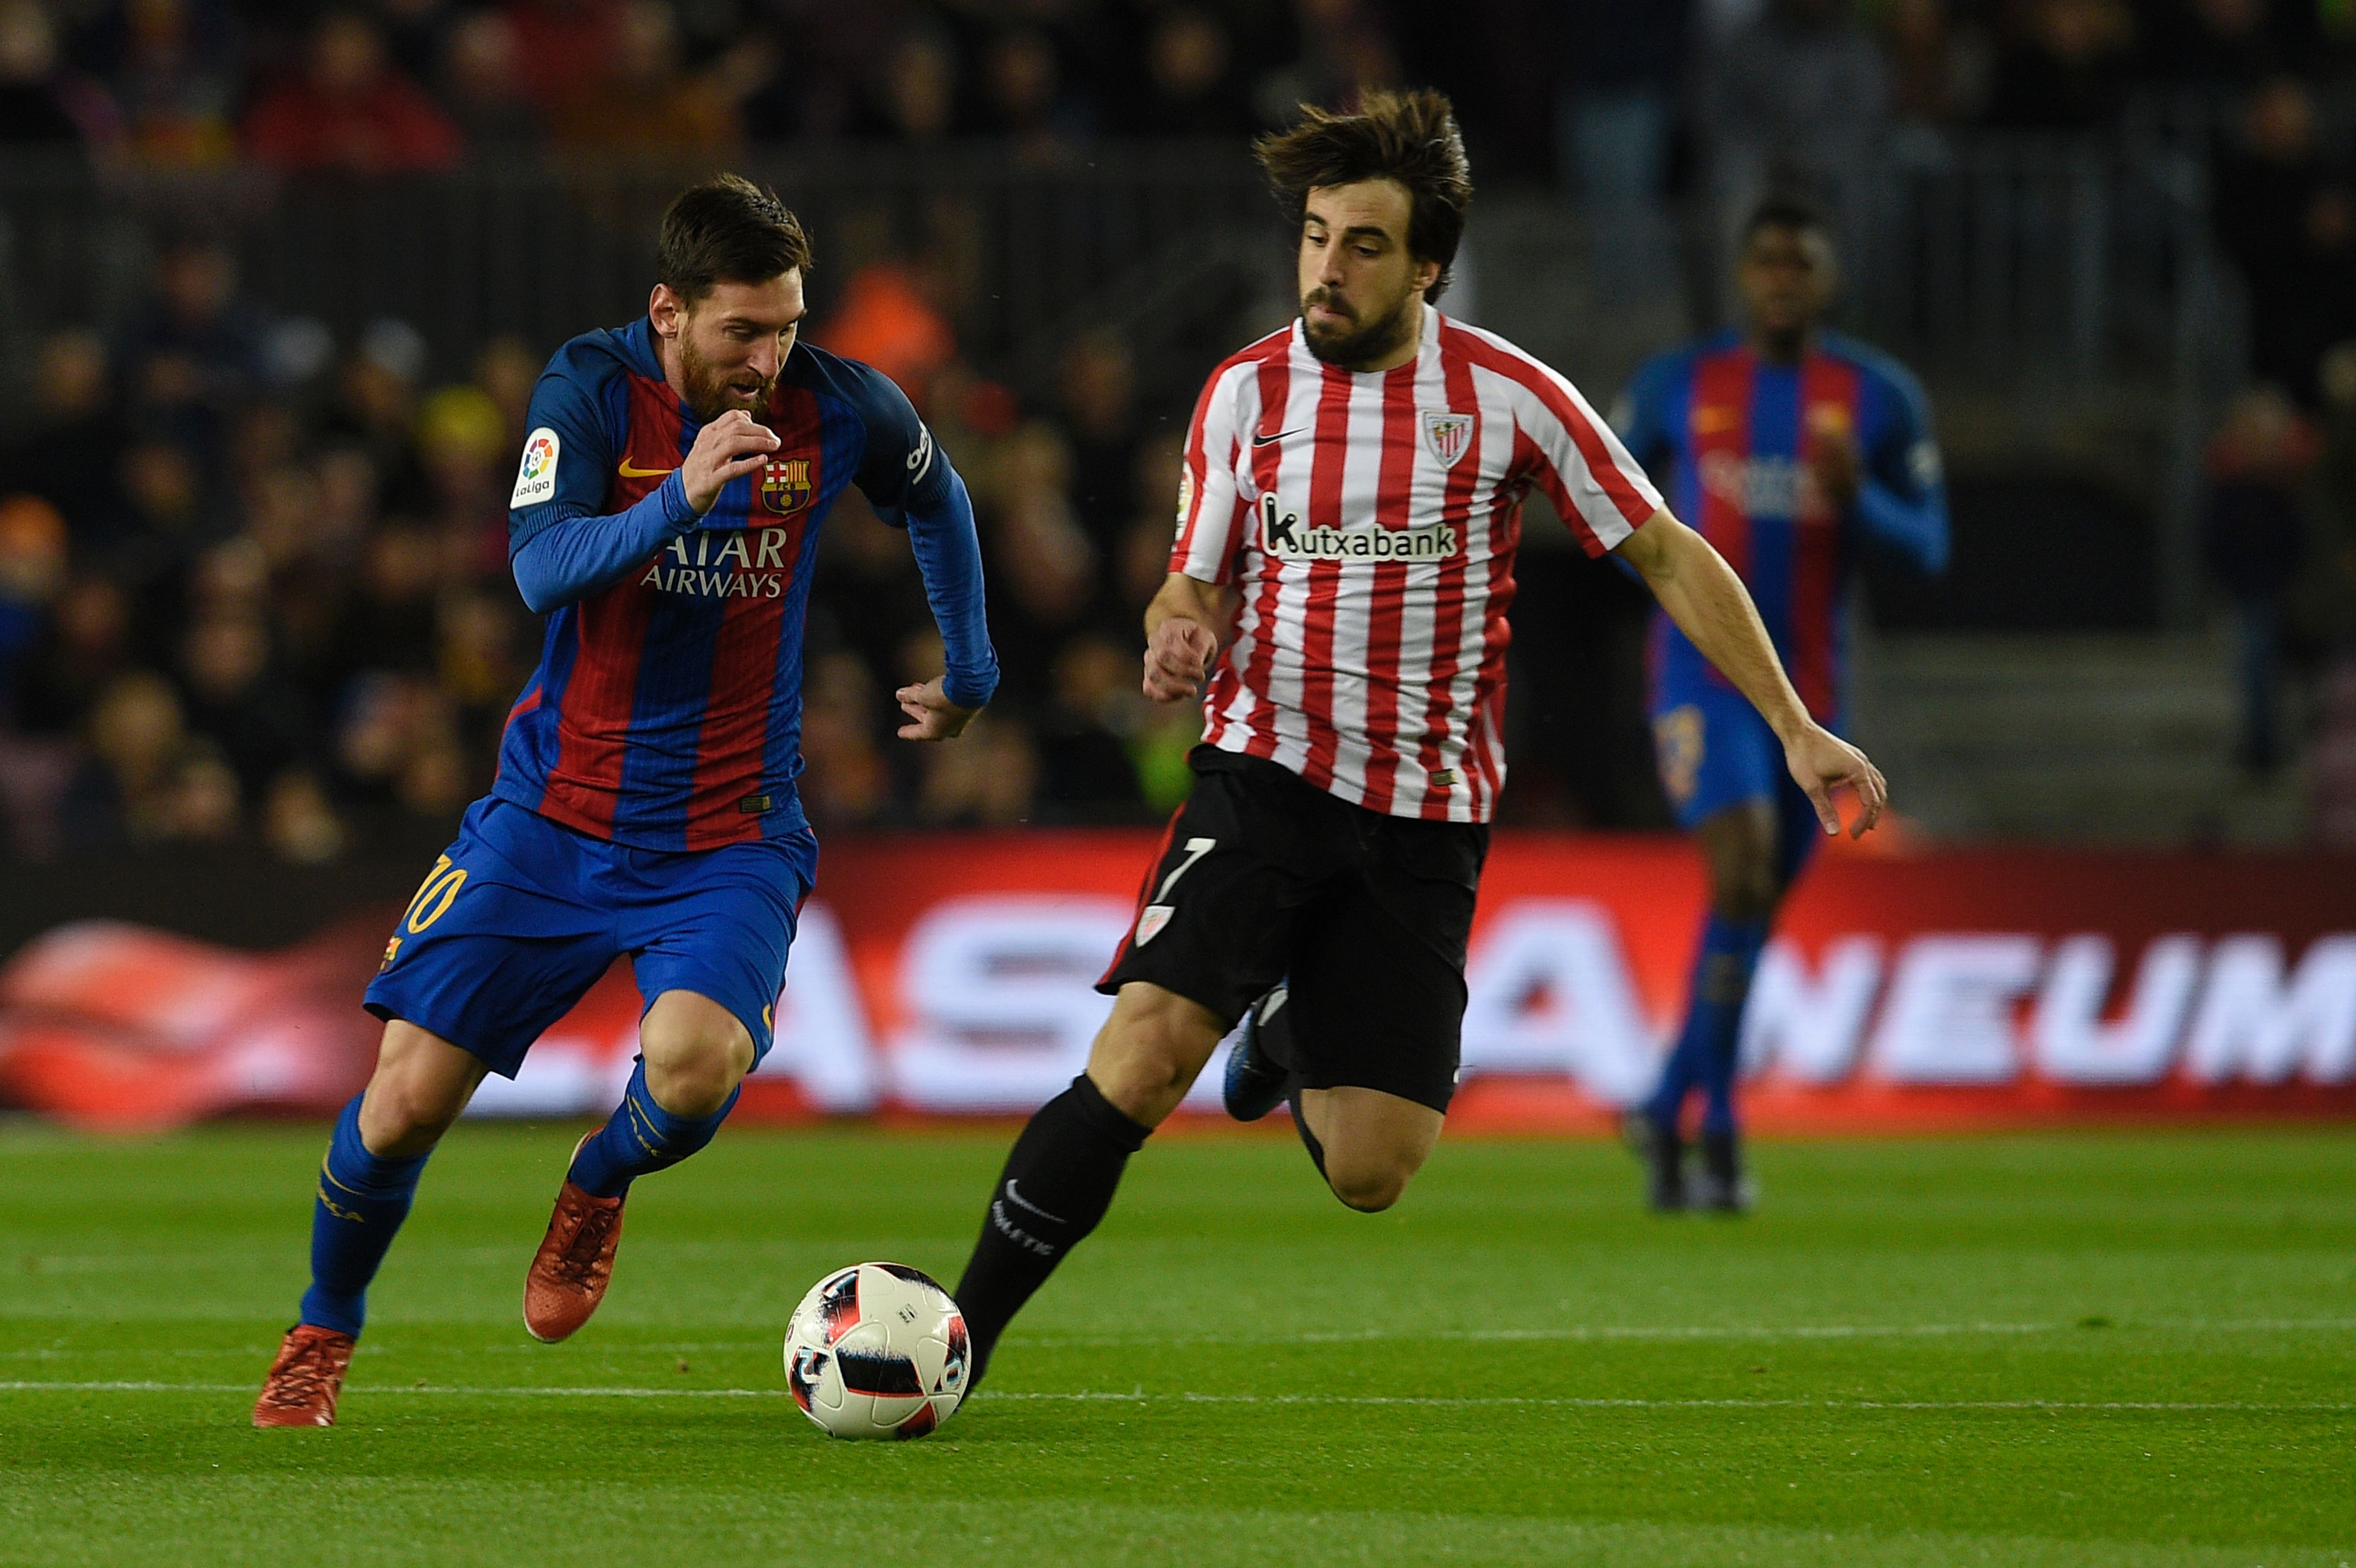 Barcelona's Argentinian forward Lionel Messi (L) vies with Athletic Bilbao's midfielder Benat Etxebarria Urkiaga (R) during the Spanish Copa del Rey (King's Cup) round of 16 second leg football match FC Barcelona vs Athletic Club de Bilbao at the Camp Nou stadium in Barcelona on January 11, 2017. / AFP / LLUIS GENE        (Photo credit should read LLUIS GENE/AFP/Getty Images)